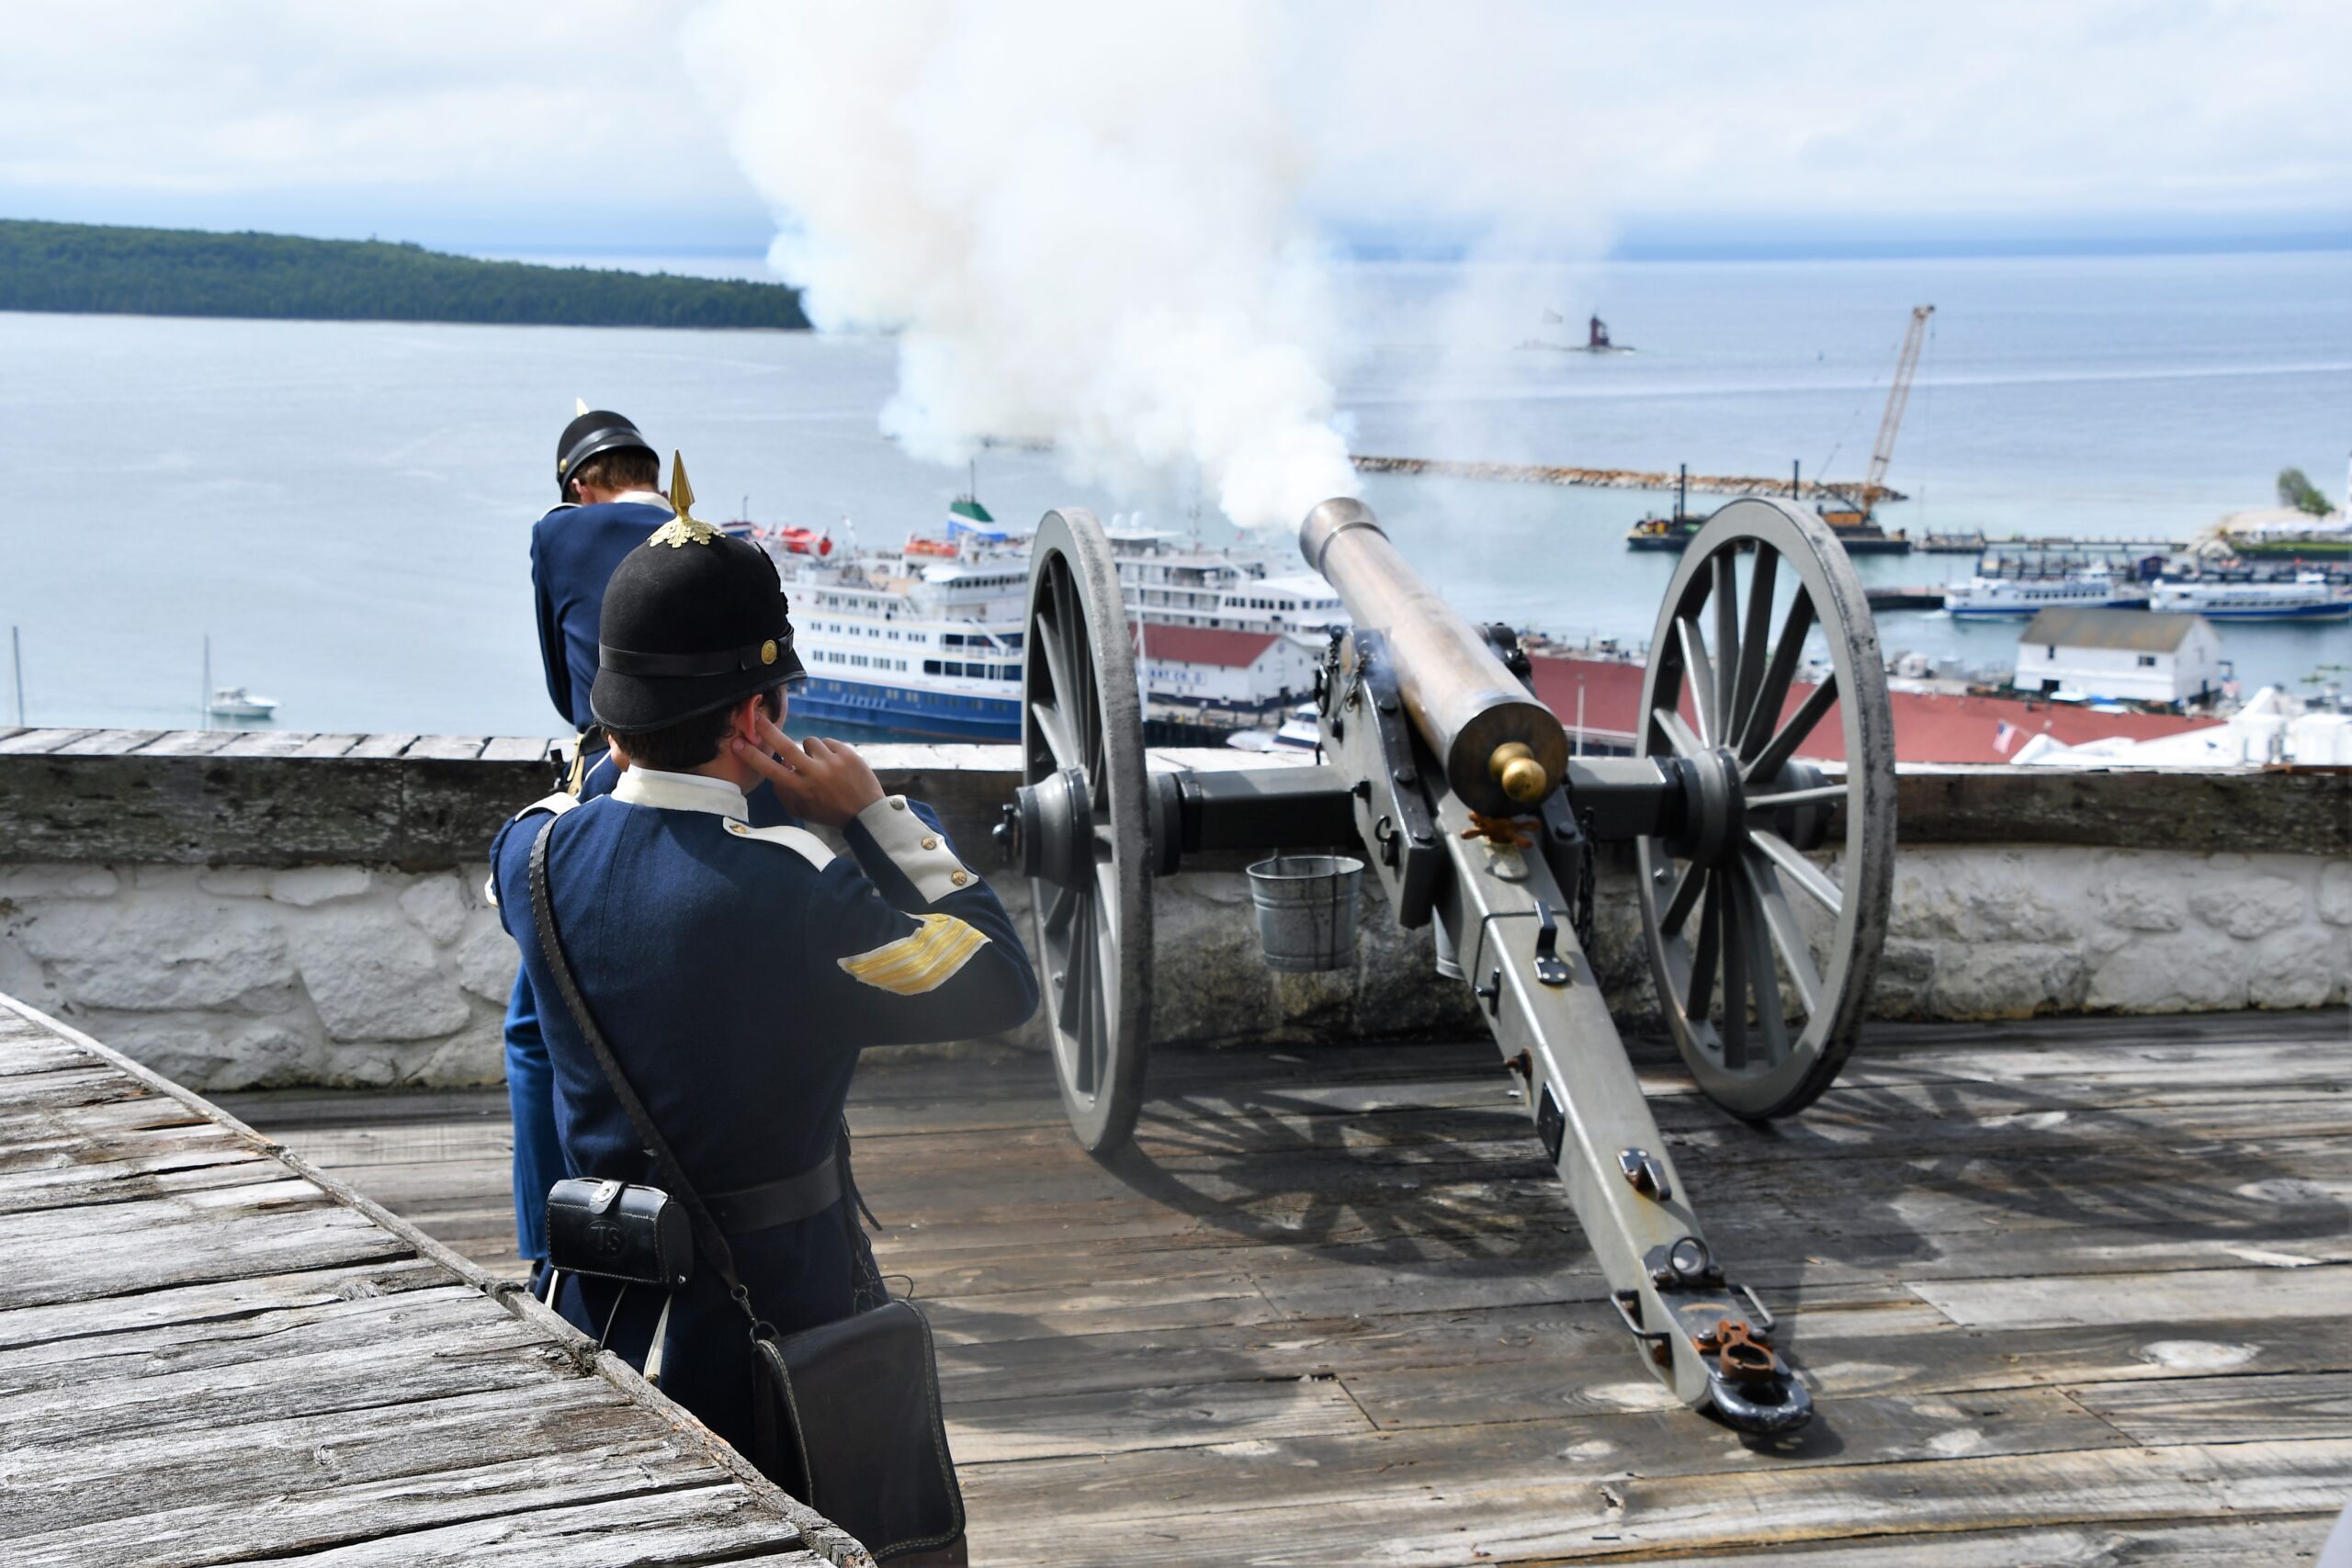 The-daily-cannon-firing-at-Fort-Mackinac-with-Ocean-Voyager-in-the-background